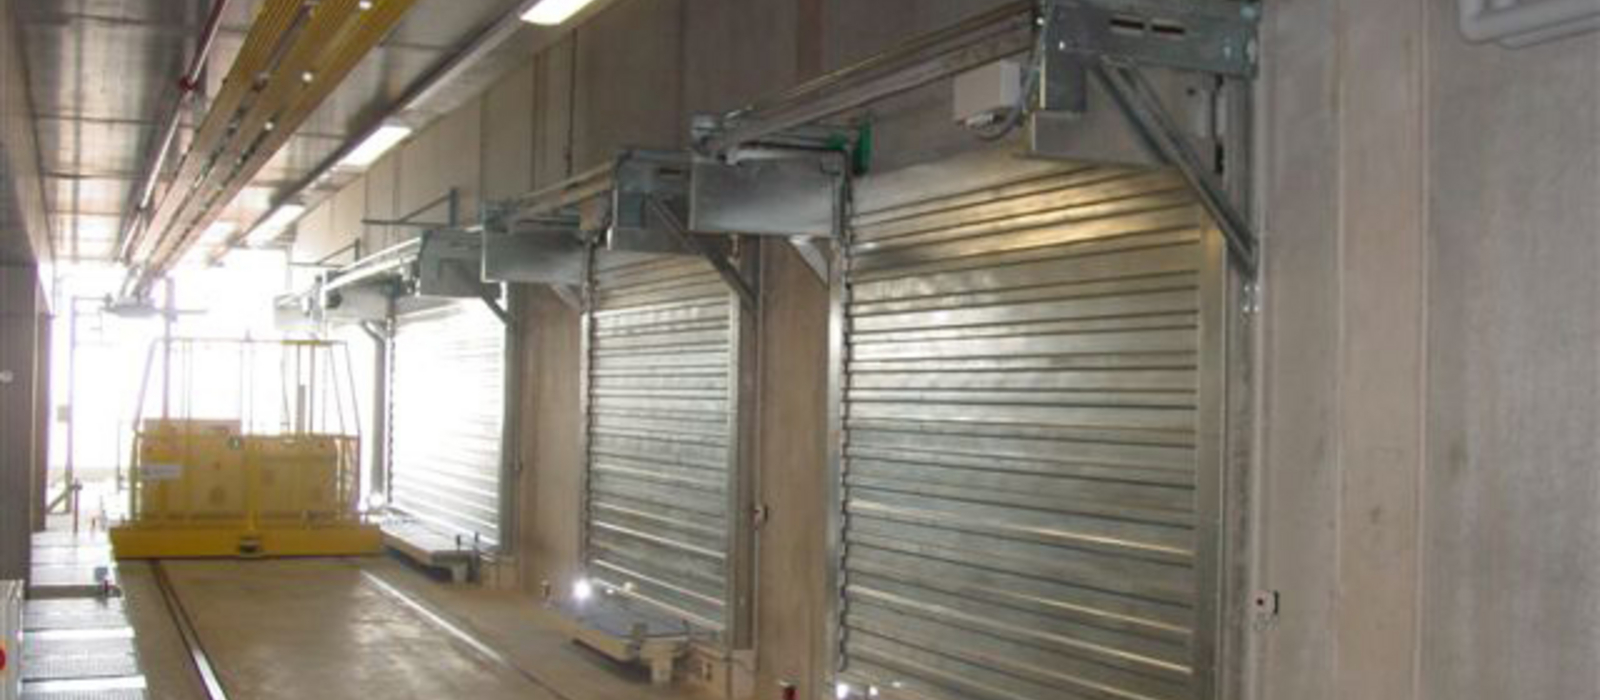 Fire protection in buildings with rail-bound intralogistics